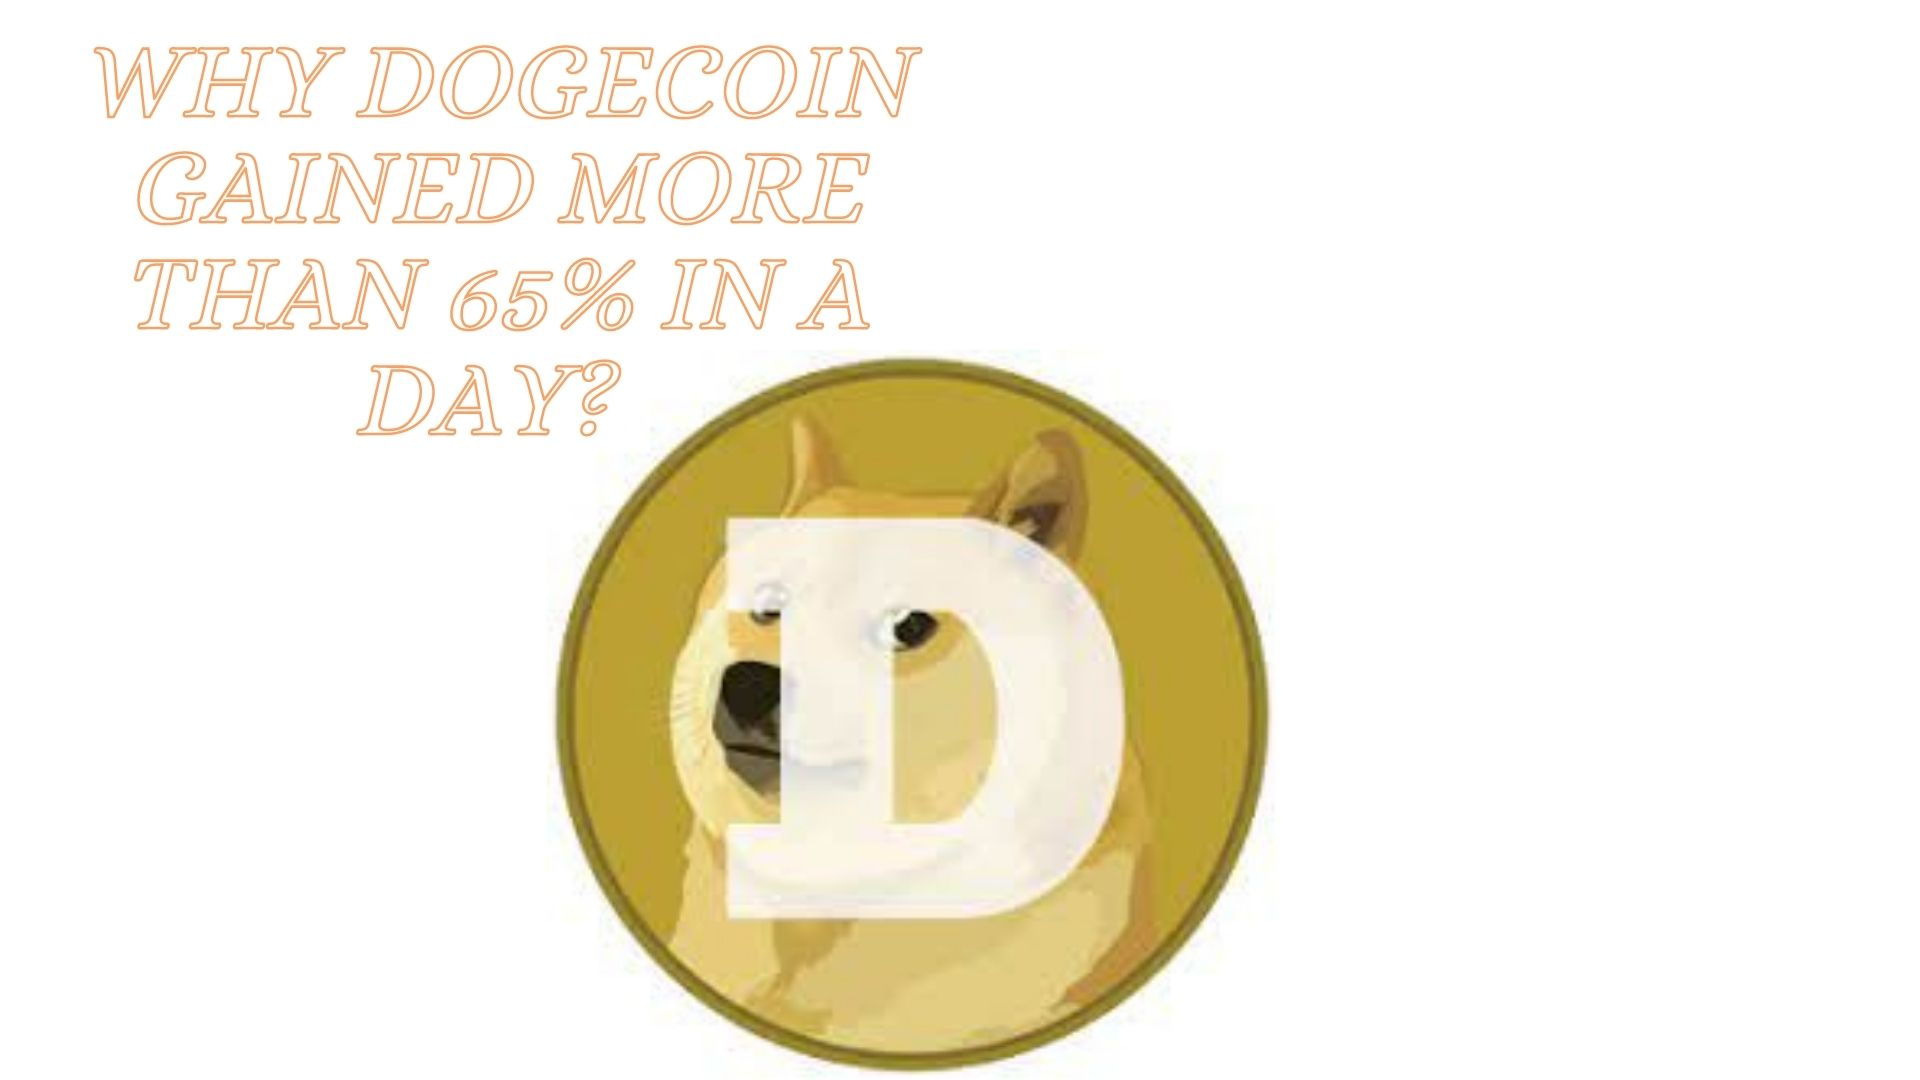 Why dogecoin gained more than 65% in a day?